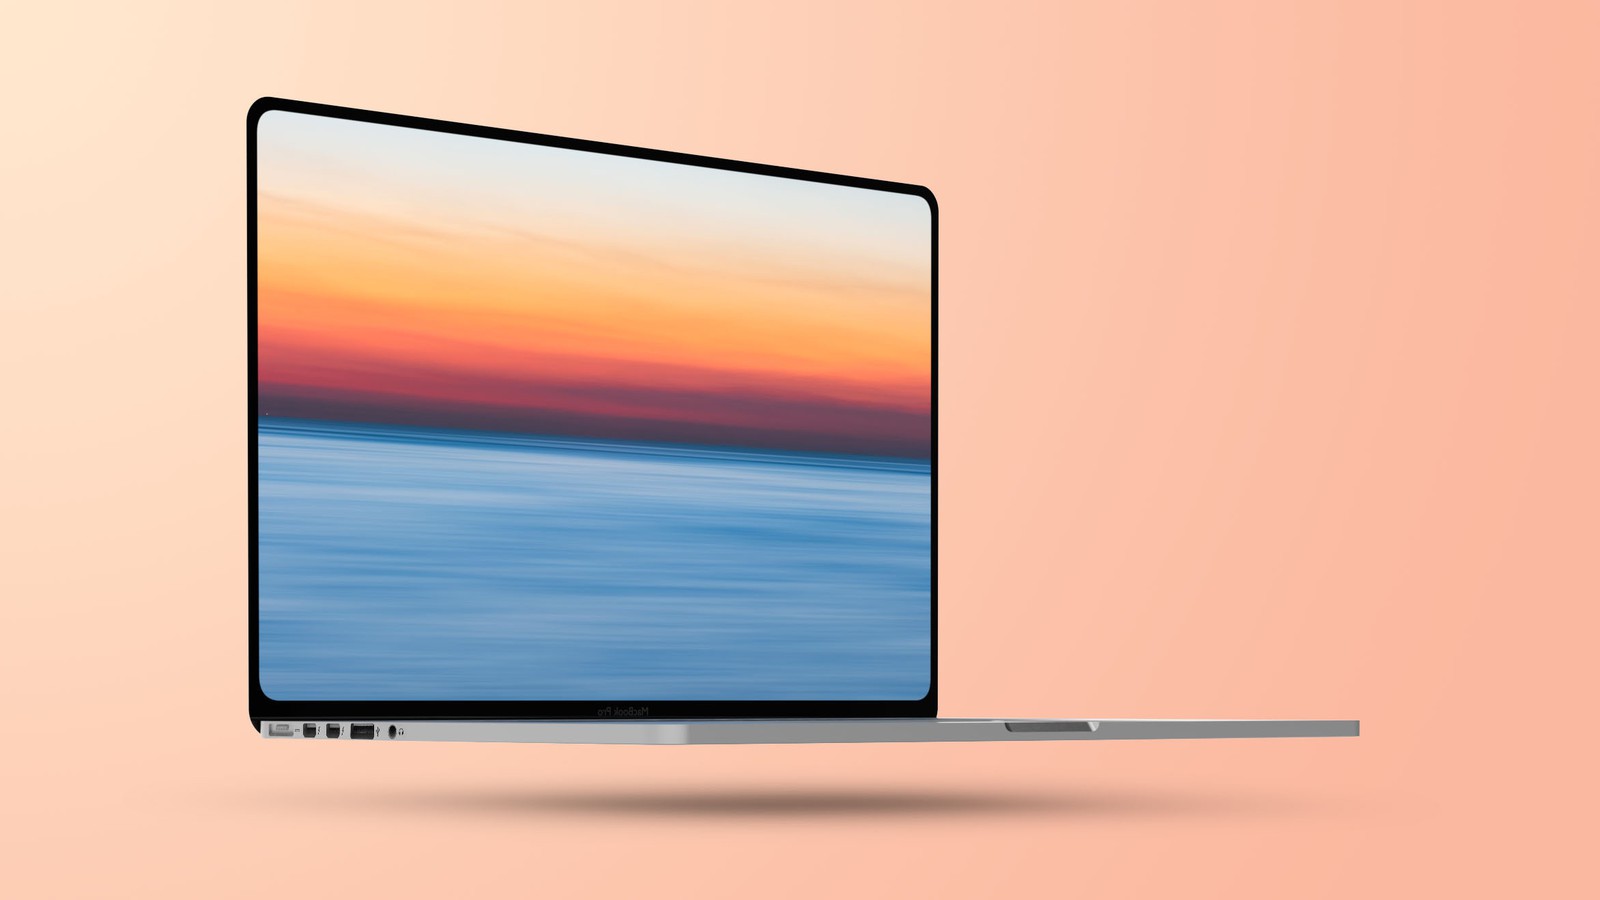 Apple's 2021 MacBook Pro refreshes will have a flat design, aping the